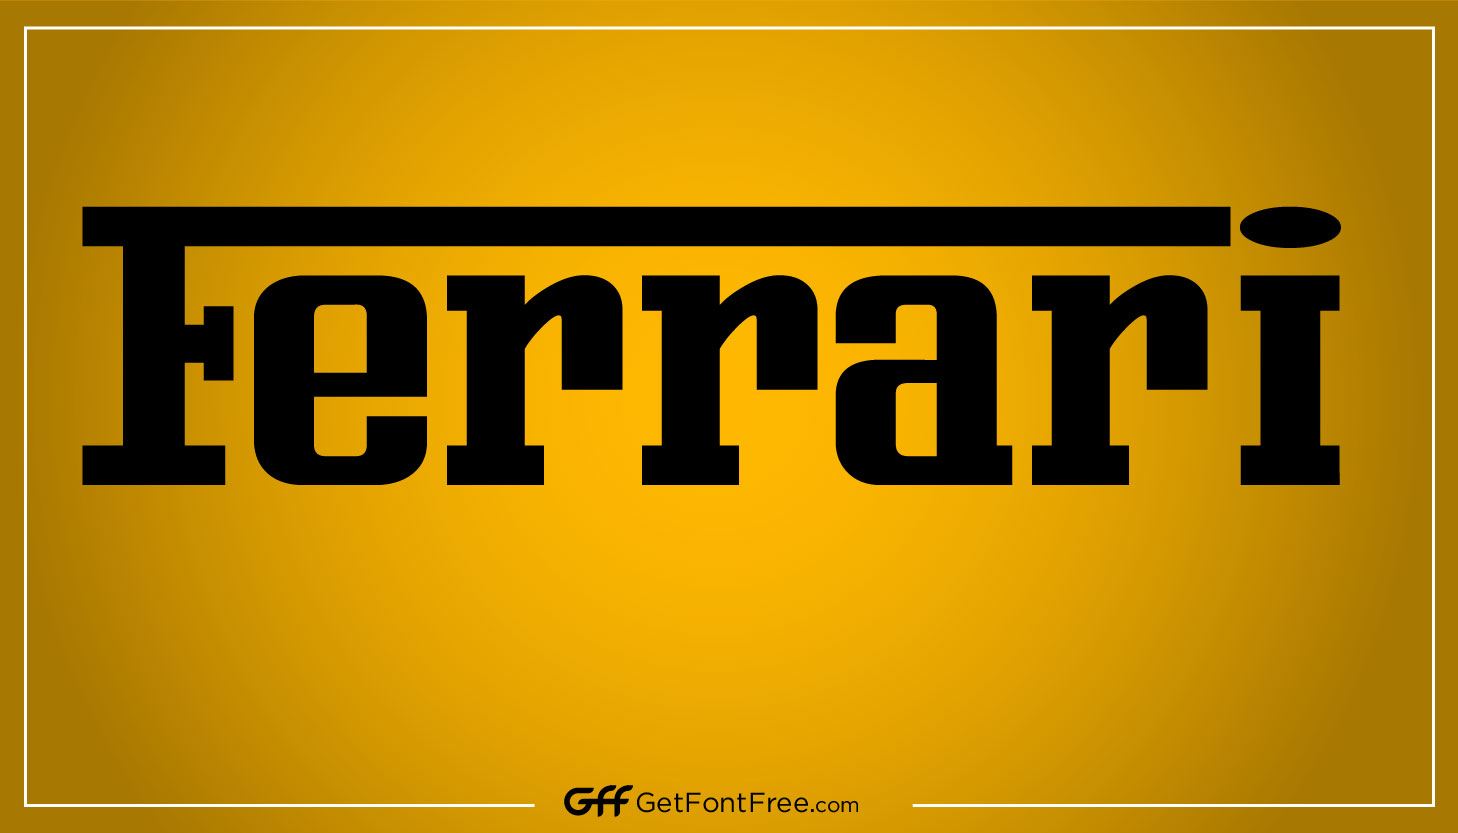 Welcome to Ferrari Font! Enzo Ferrari founded the sports automobile manufacturer Ferrari in the middle of 1929. This company's racing helped it get a lot of market traction. Right now, we're talking about the typeface that Ferrari picked for their logo. There are 226 characters in all.